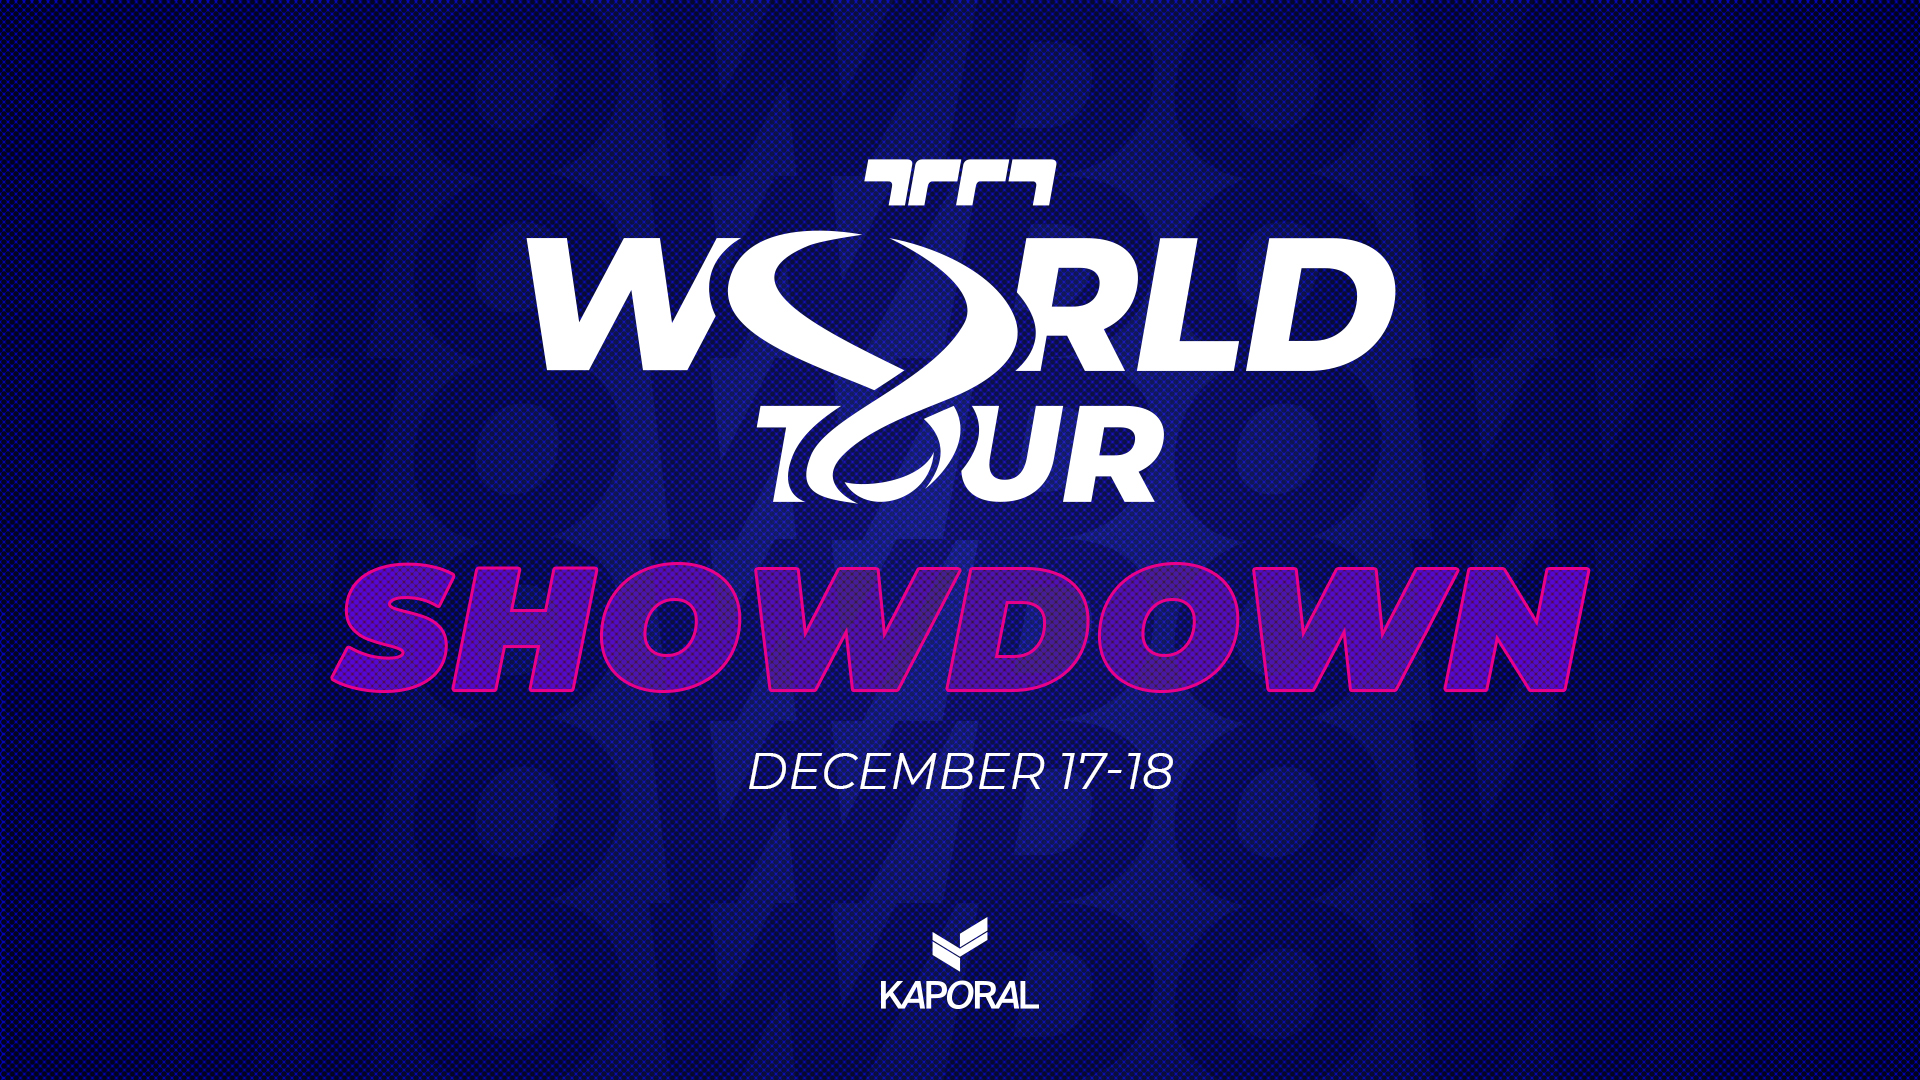 Trackmania World Tour Showdown on December 17th and 18th